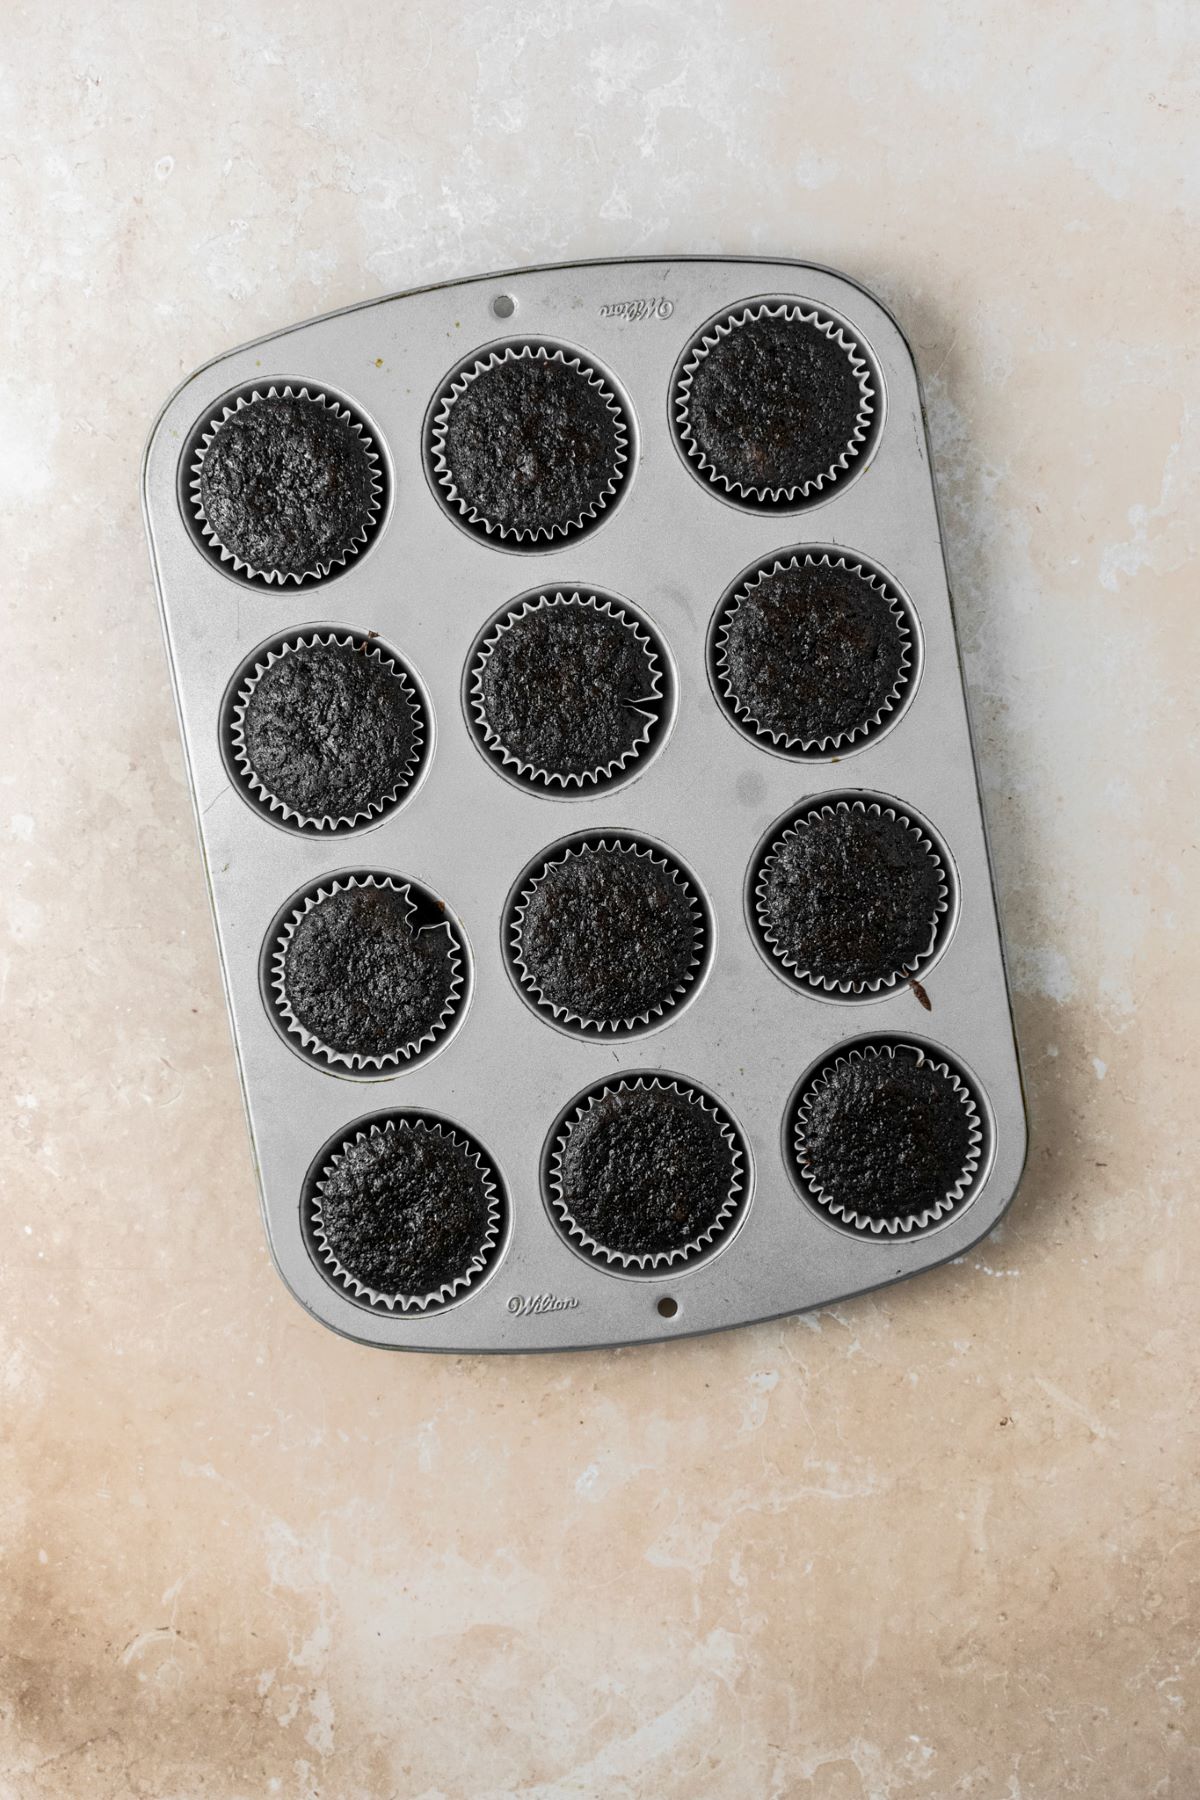 Baked chocolate cupcakes in a muffin pan.